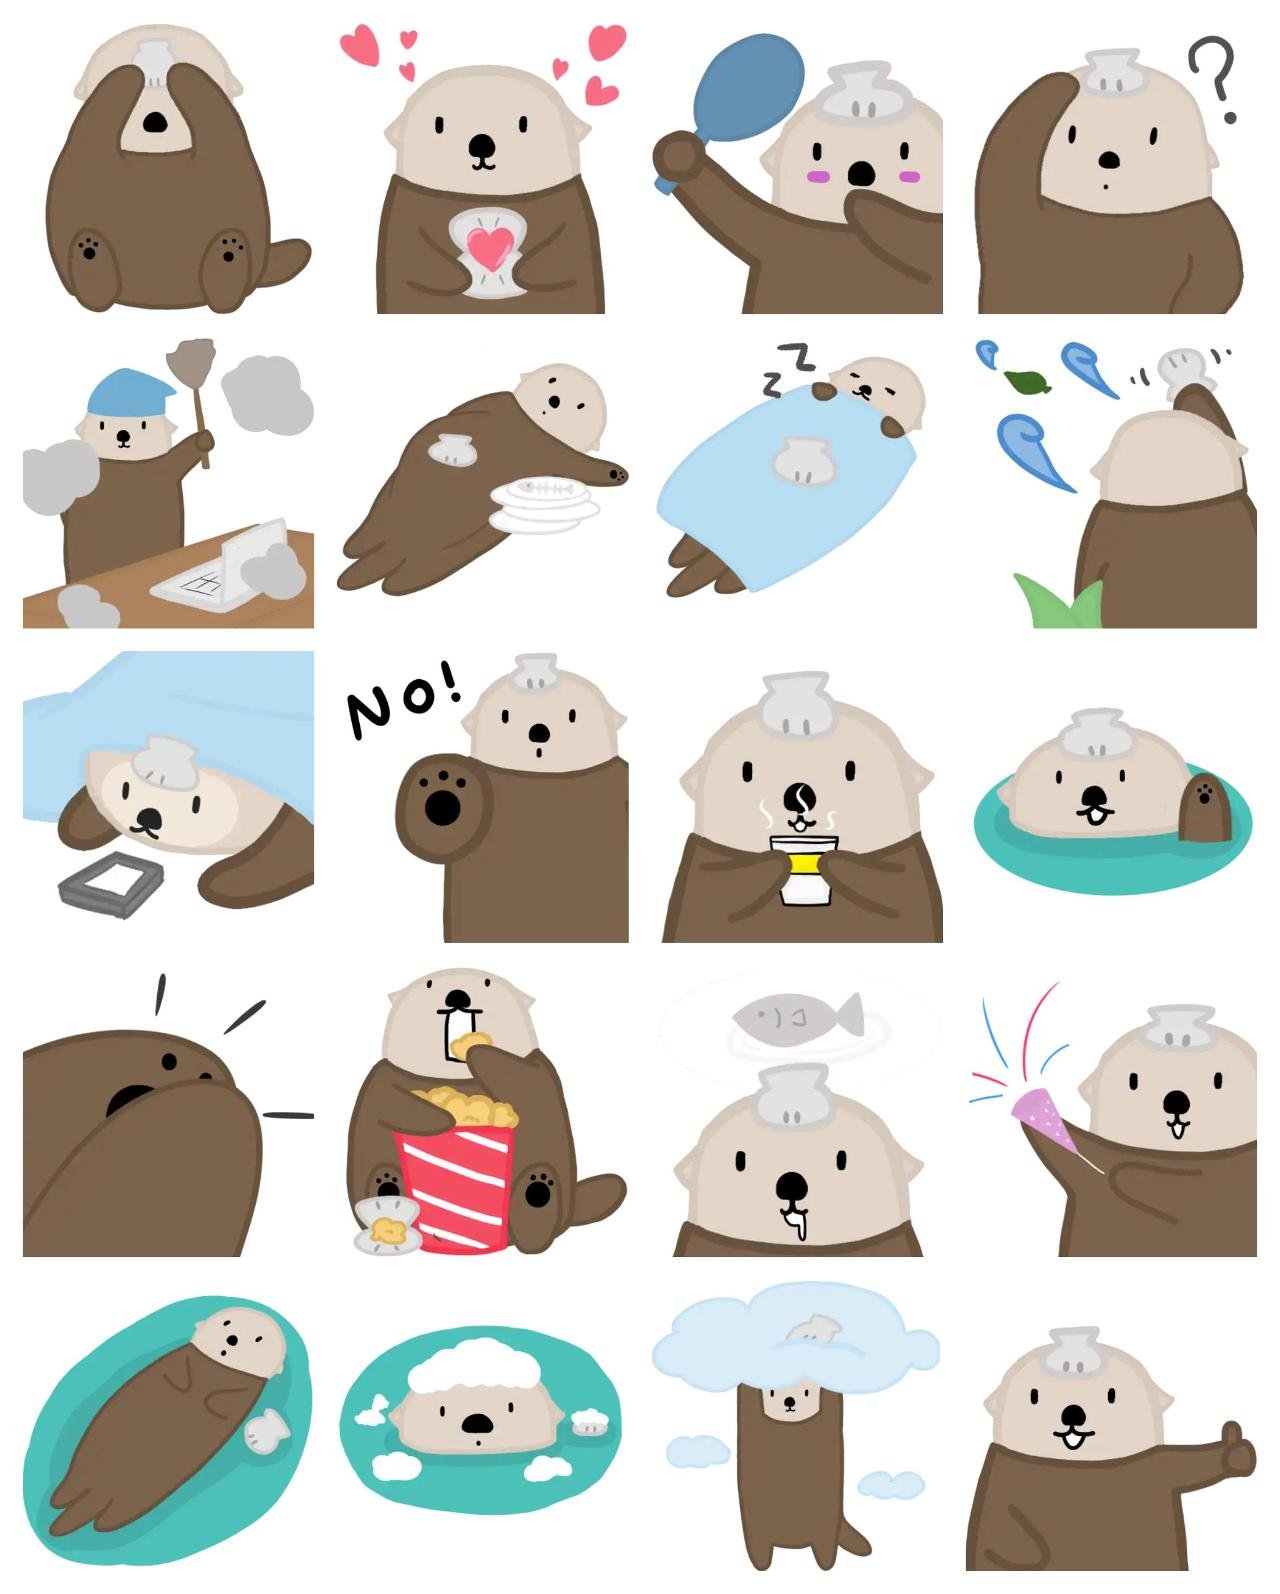 Haedaru Animals,Celebrity sticker pack for Whatsapp, Telegram, Signal, and others chatting and message apps